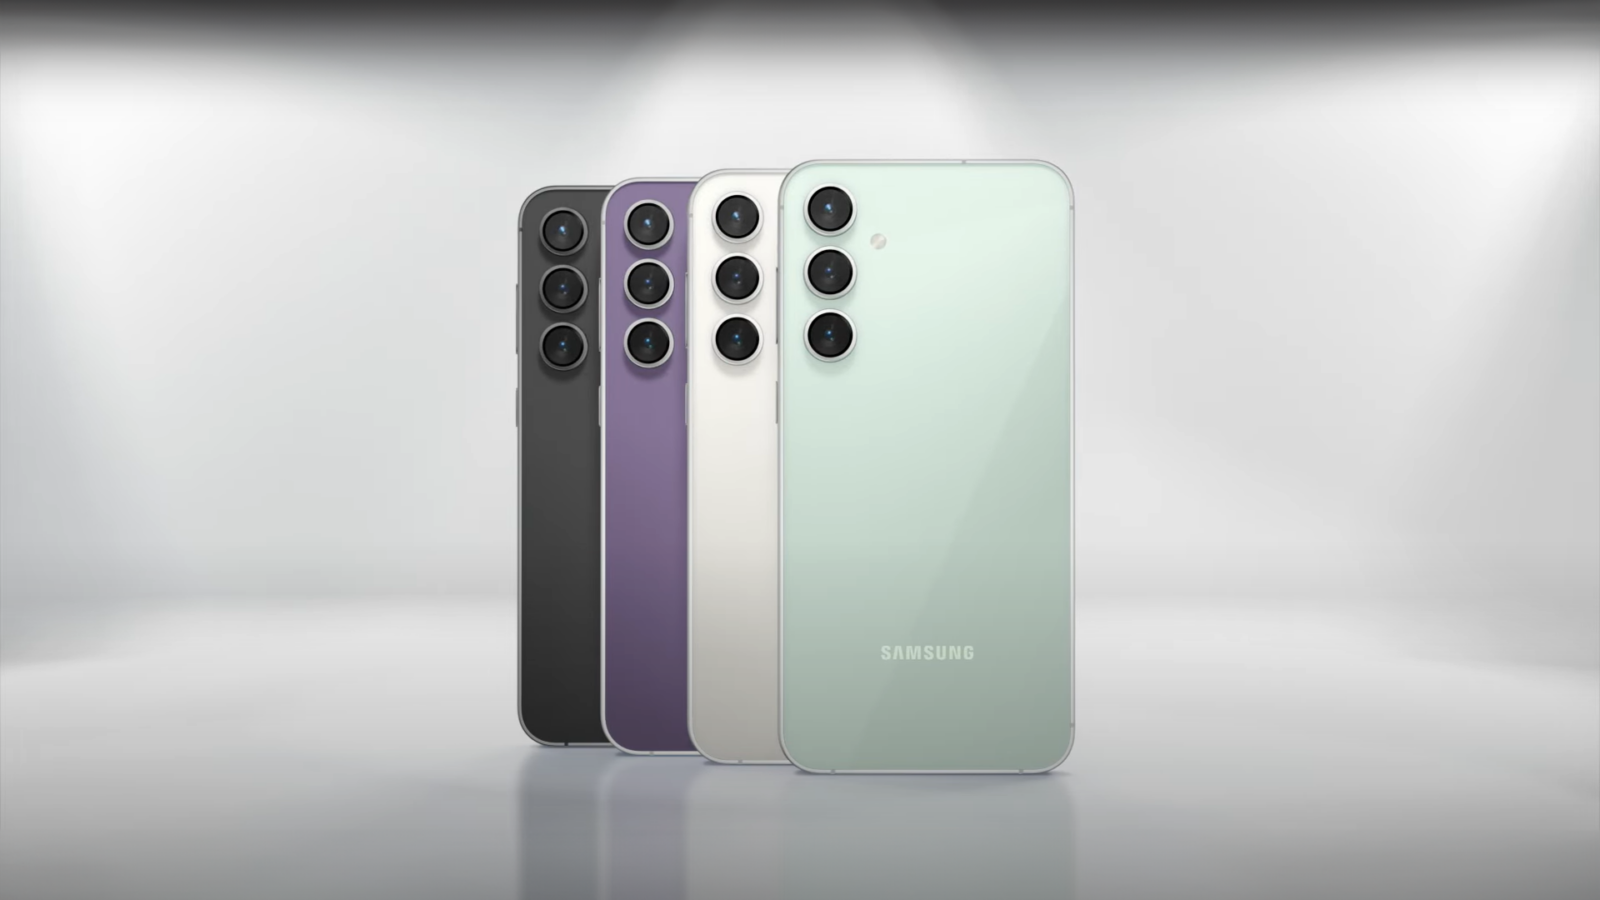 Samsung announces budget version of Galaxy S23 and Tab S9